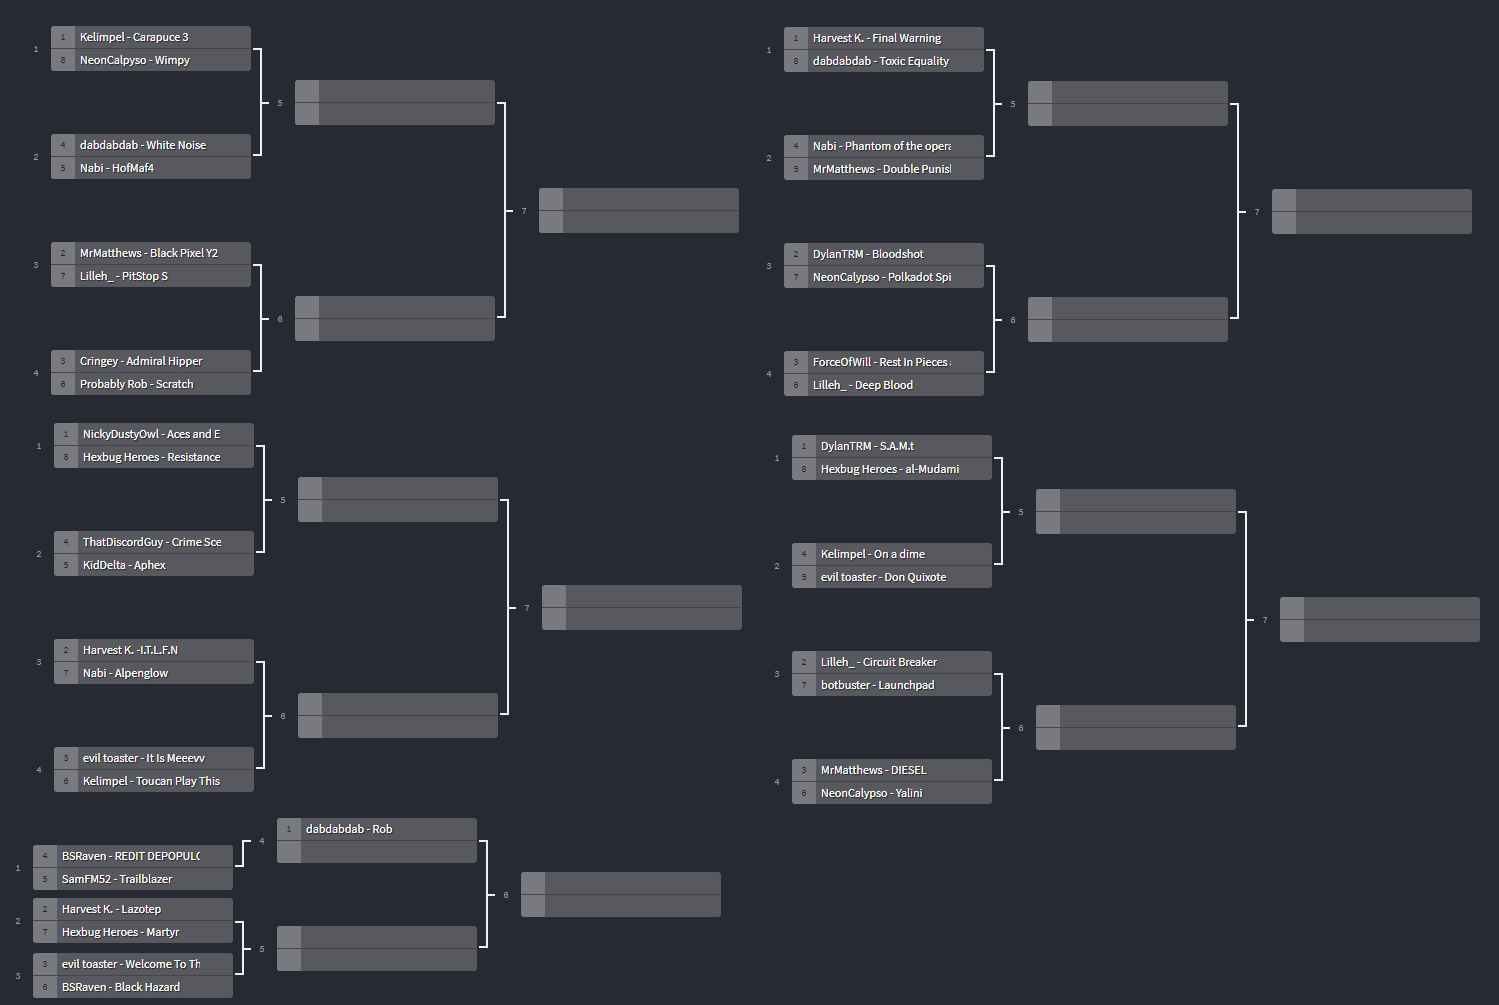 Second Chance Bracket.png